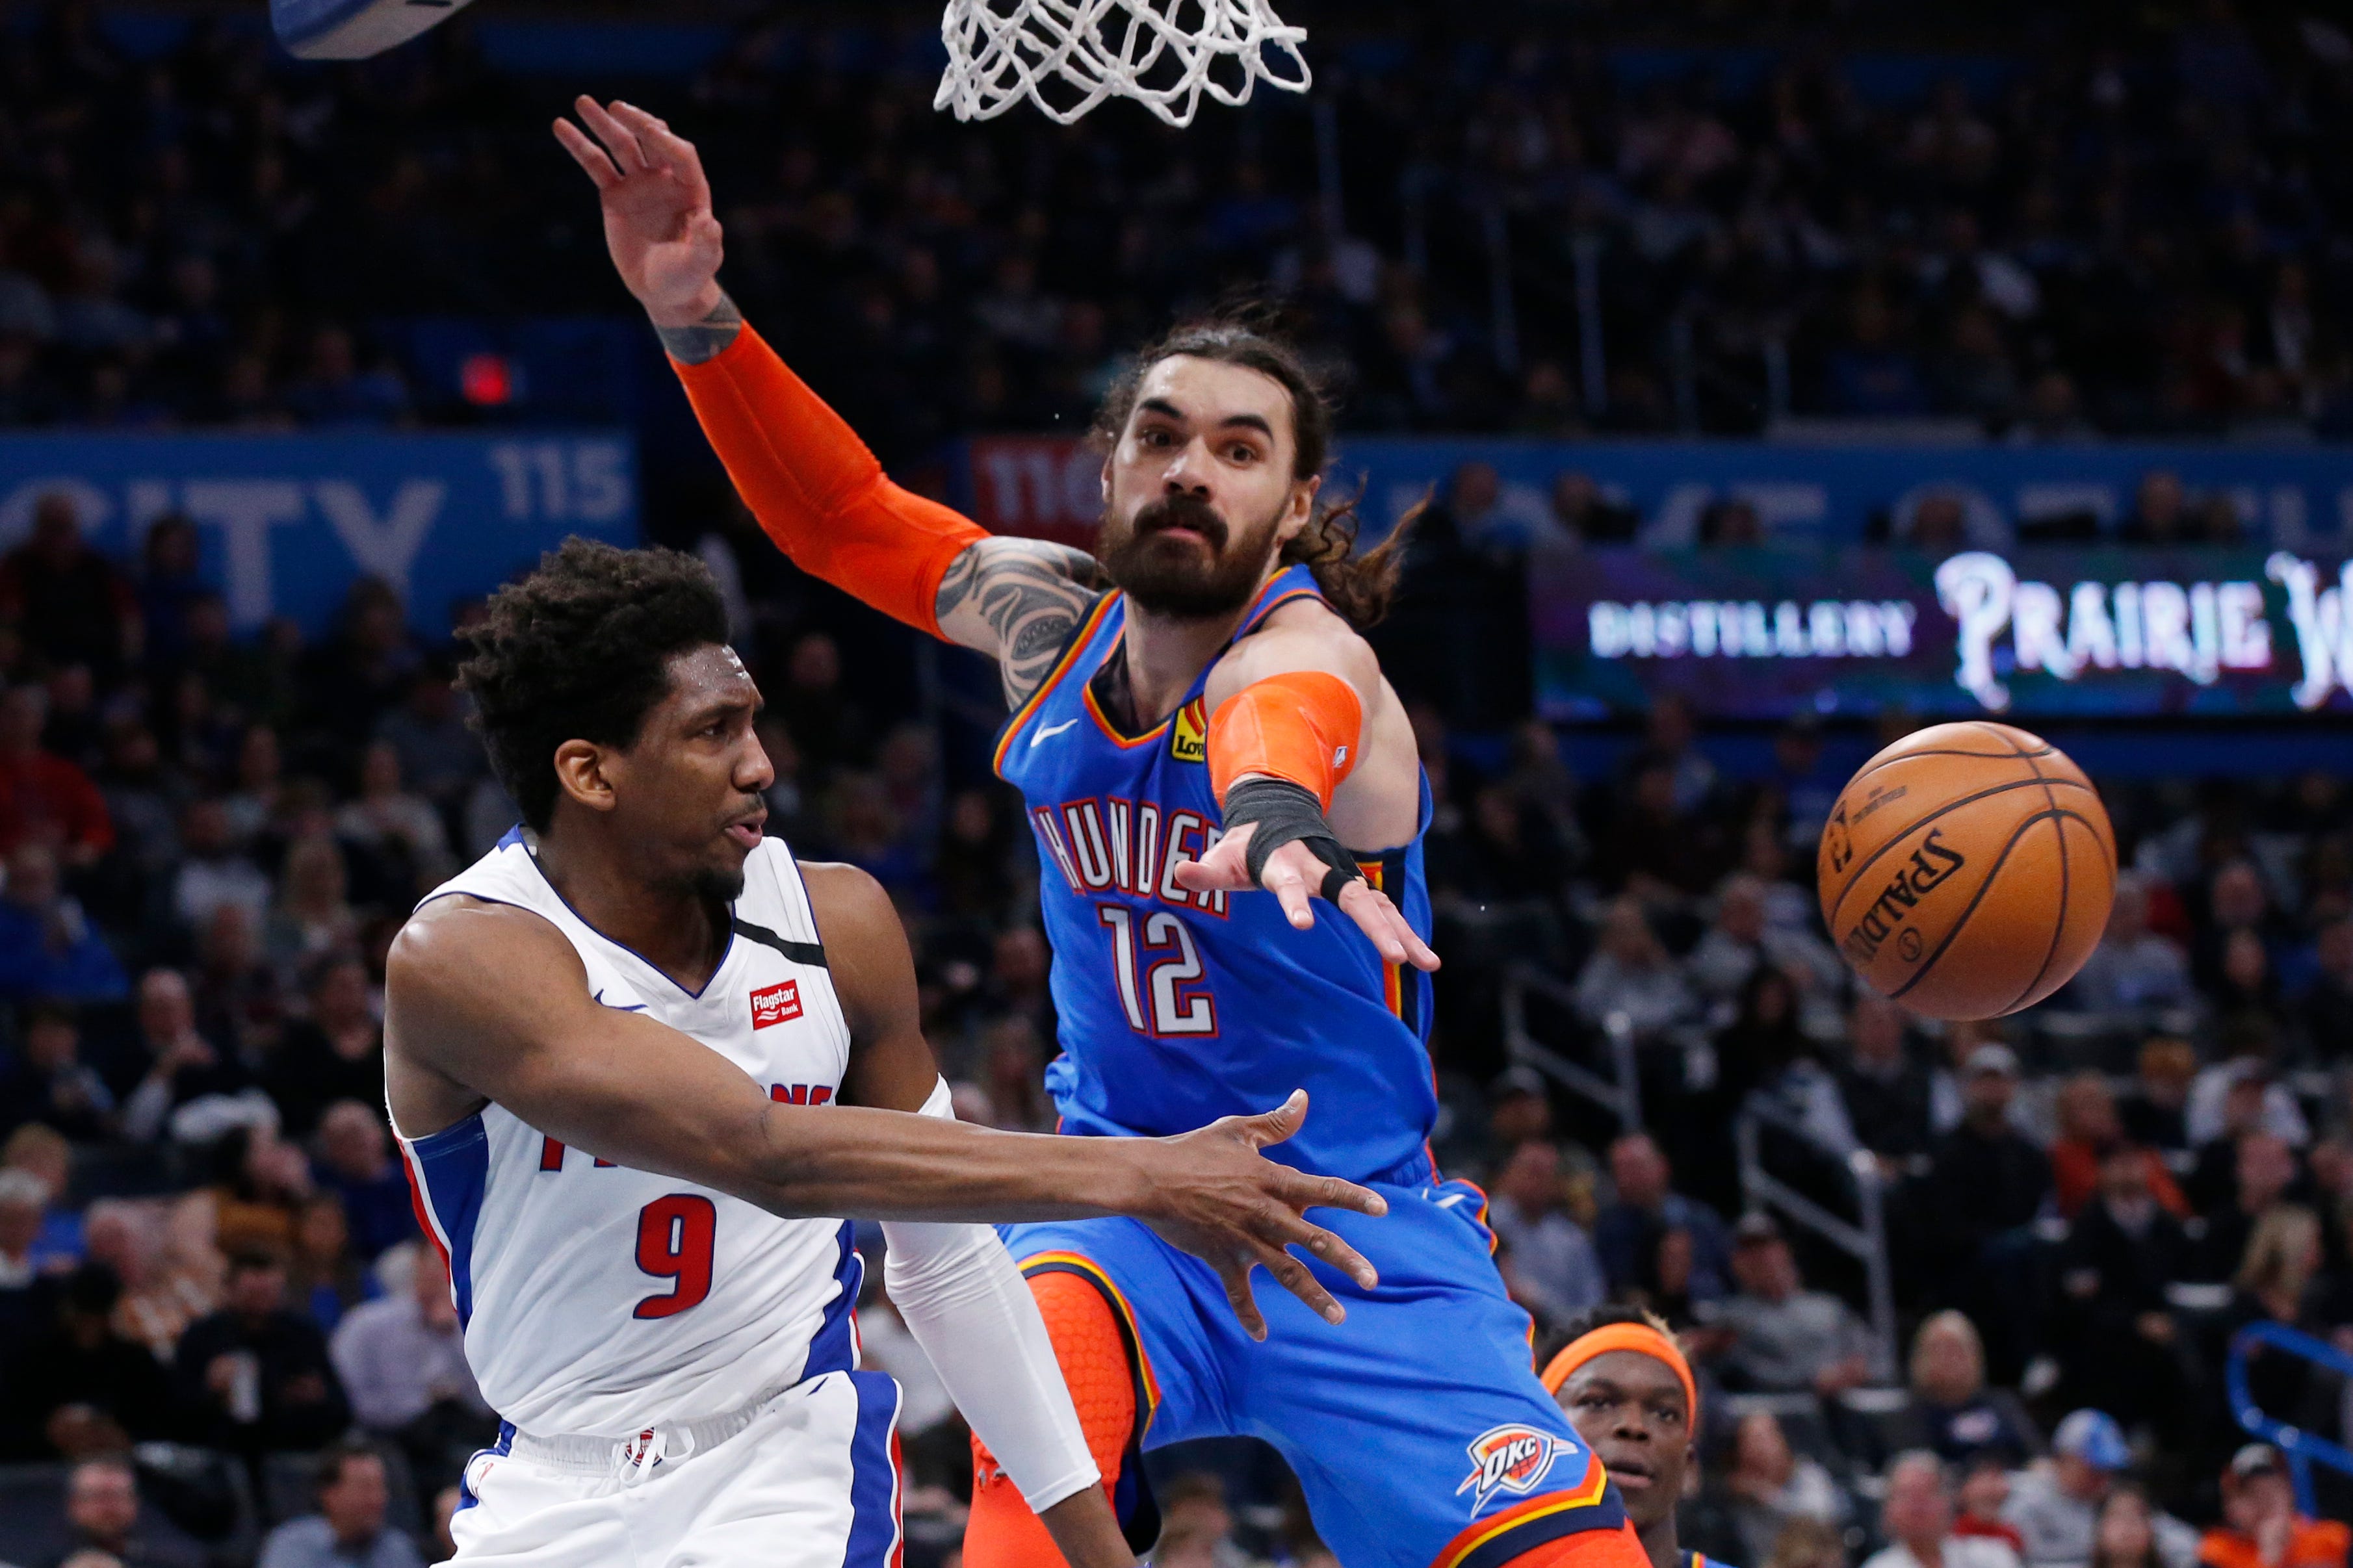 Detroit Pistons guard Langston Galloway (9) passes the ball around Oklahoma City Thunder center Steven Adams (12) during the first half.